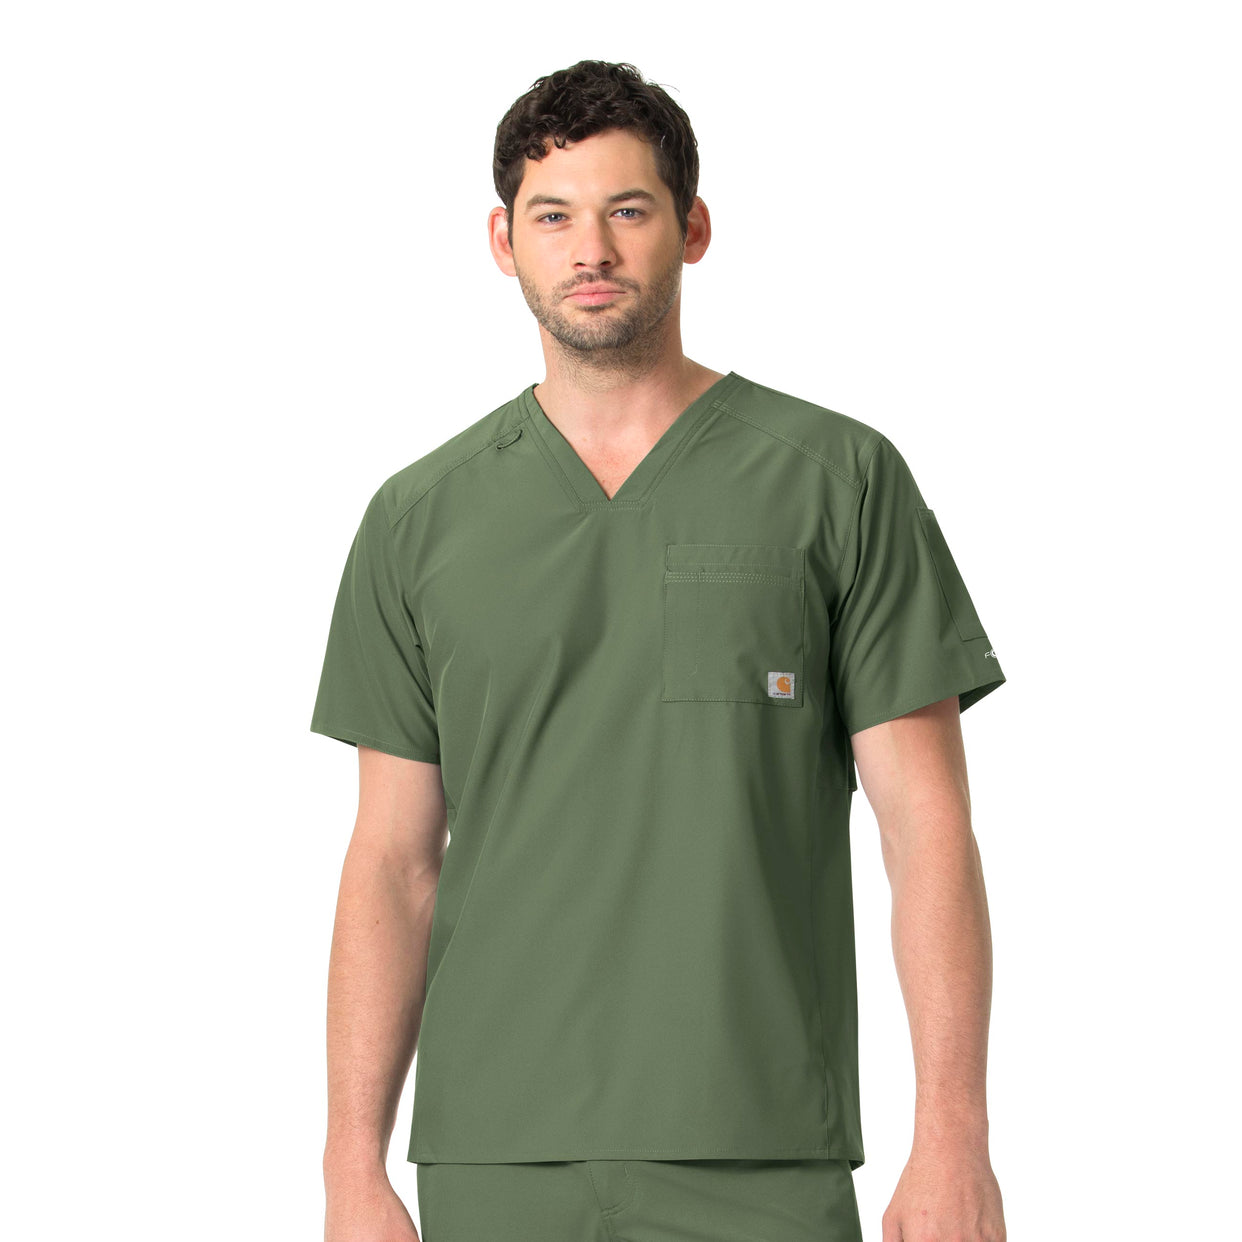 Force Liberty Men's Twill Chest Pocket Scrub Top Olive